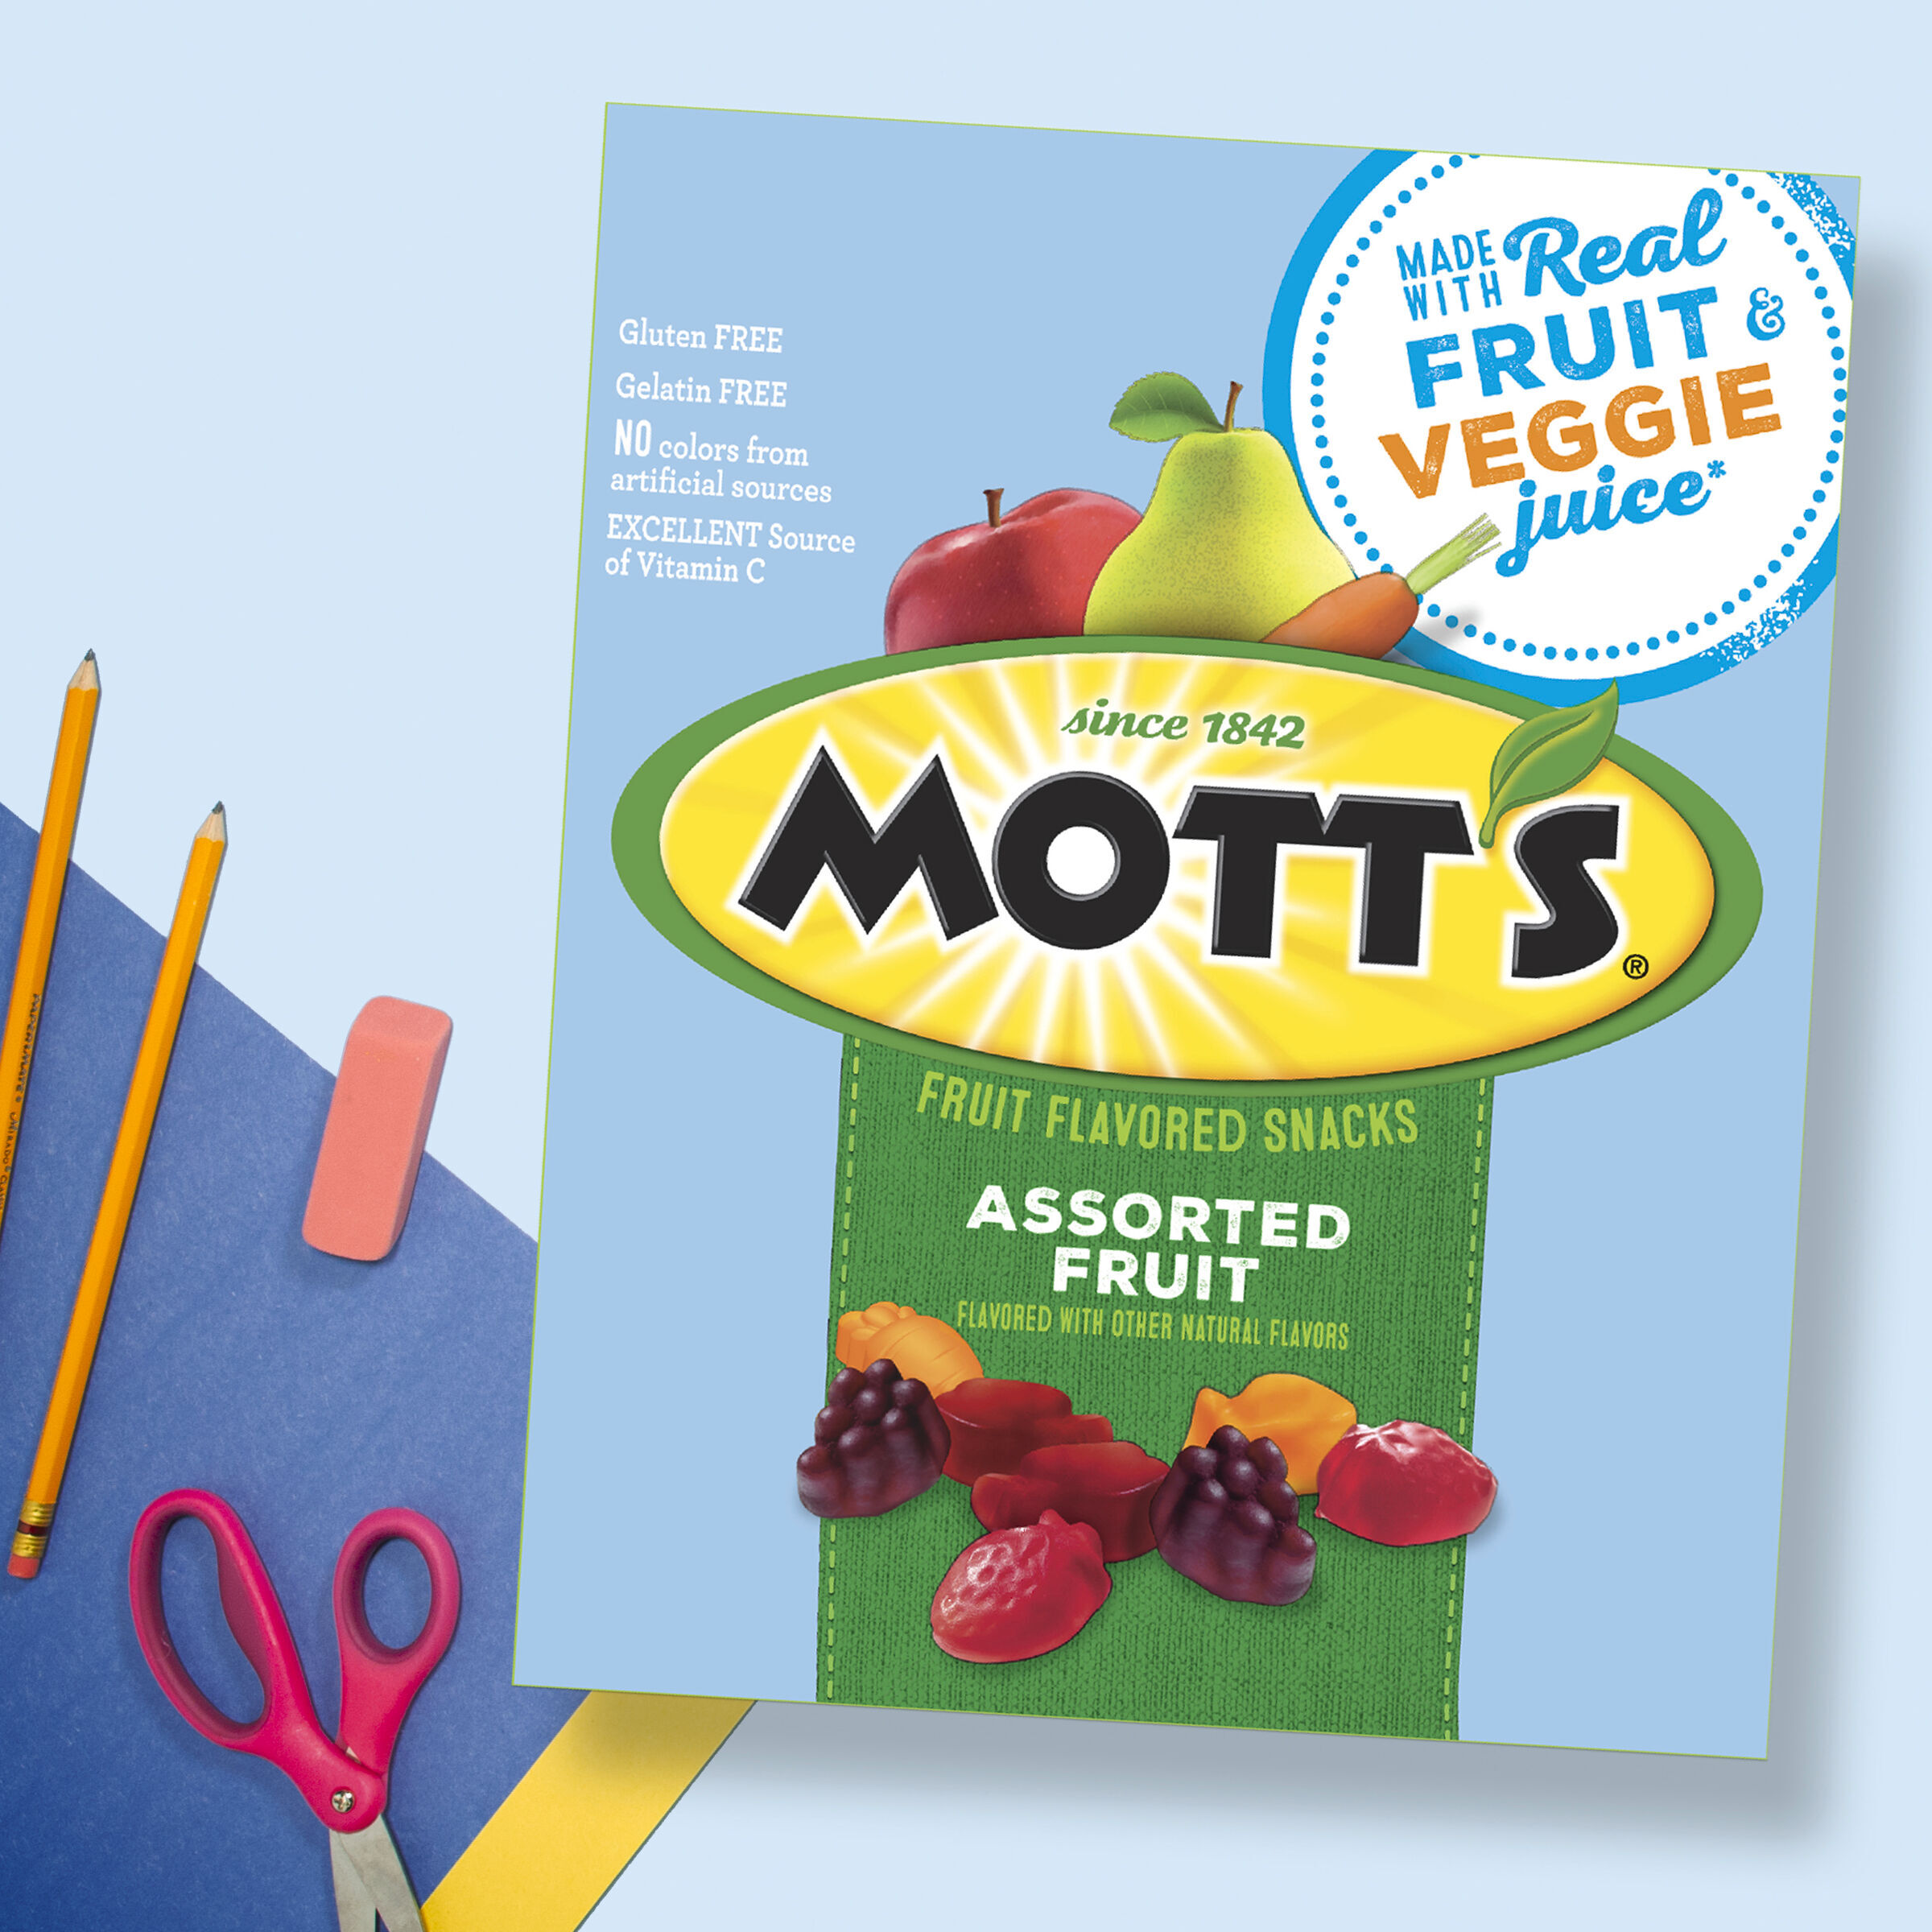 Mott's Fruit Flavored Snacks, Assorted Fruit, Pouches, 0.8 oz, 90 ct - image 5 of 9